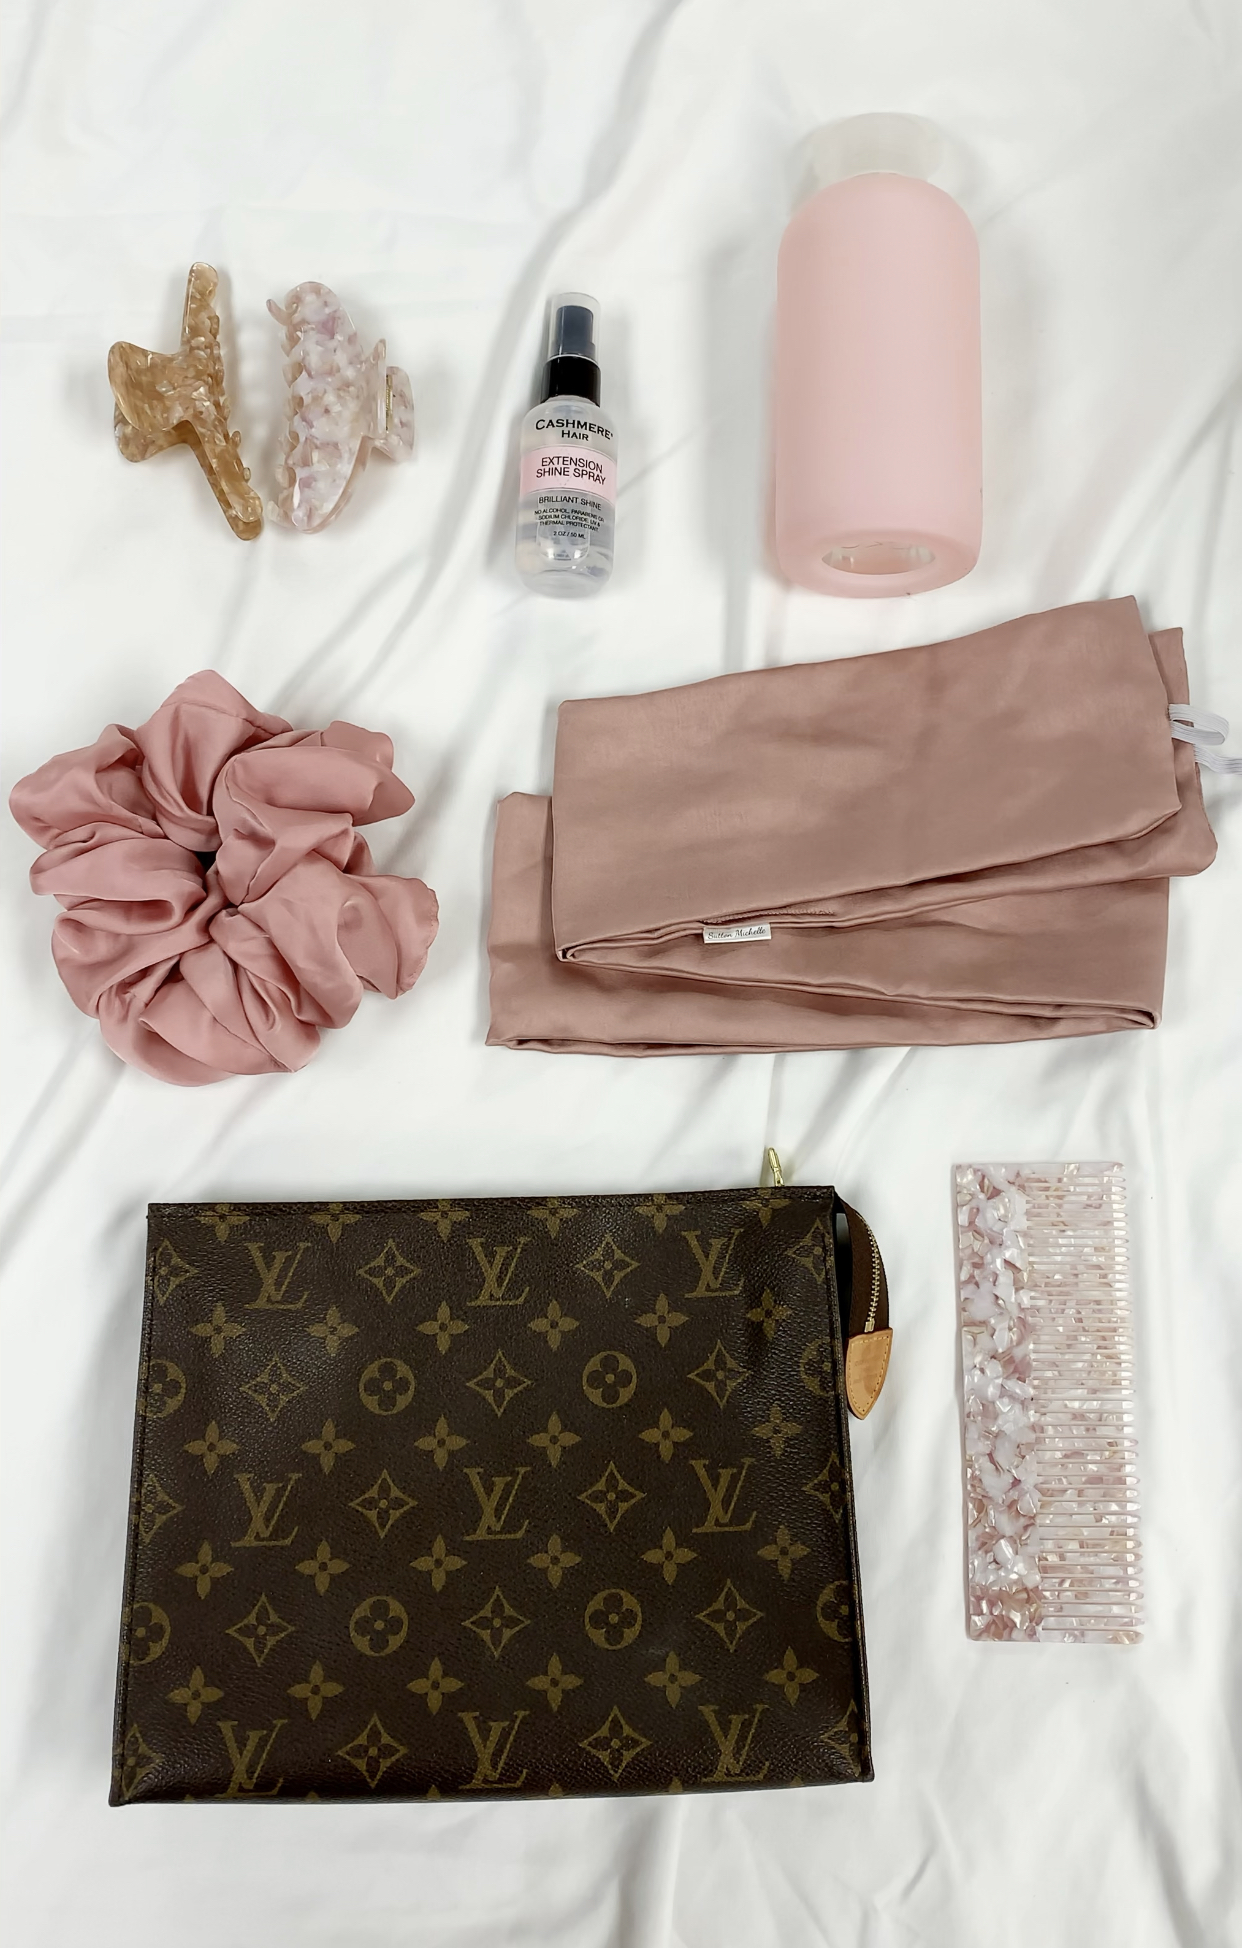 silk scrunchie, water bottle, shine spray, clips, comb, silk scarf and bag on bed sheet bedside essentials